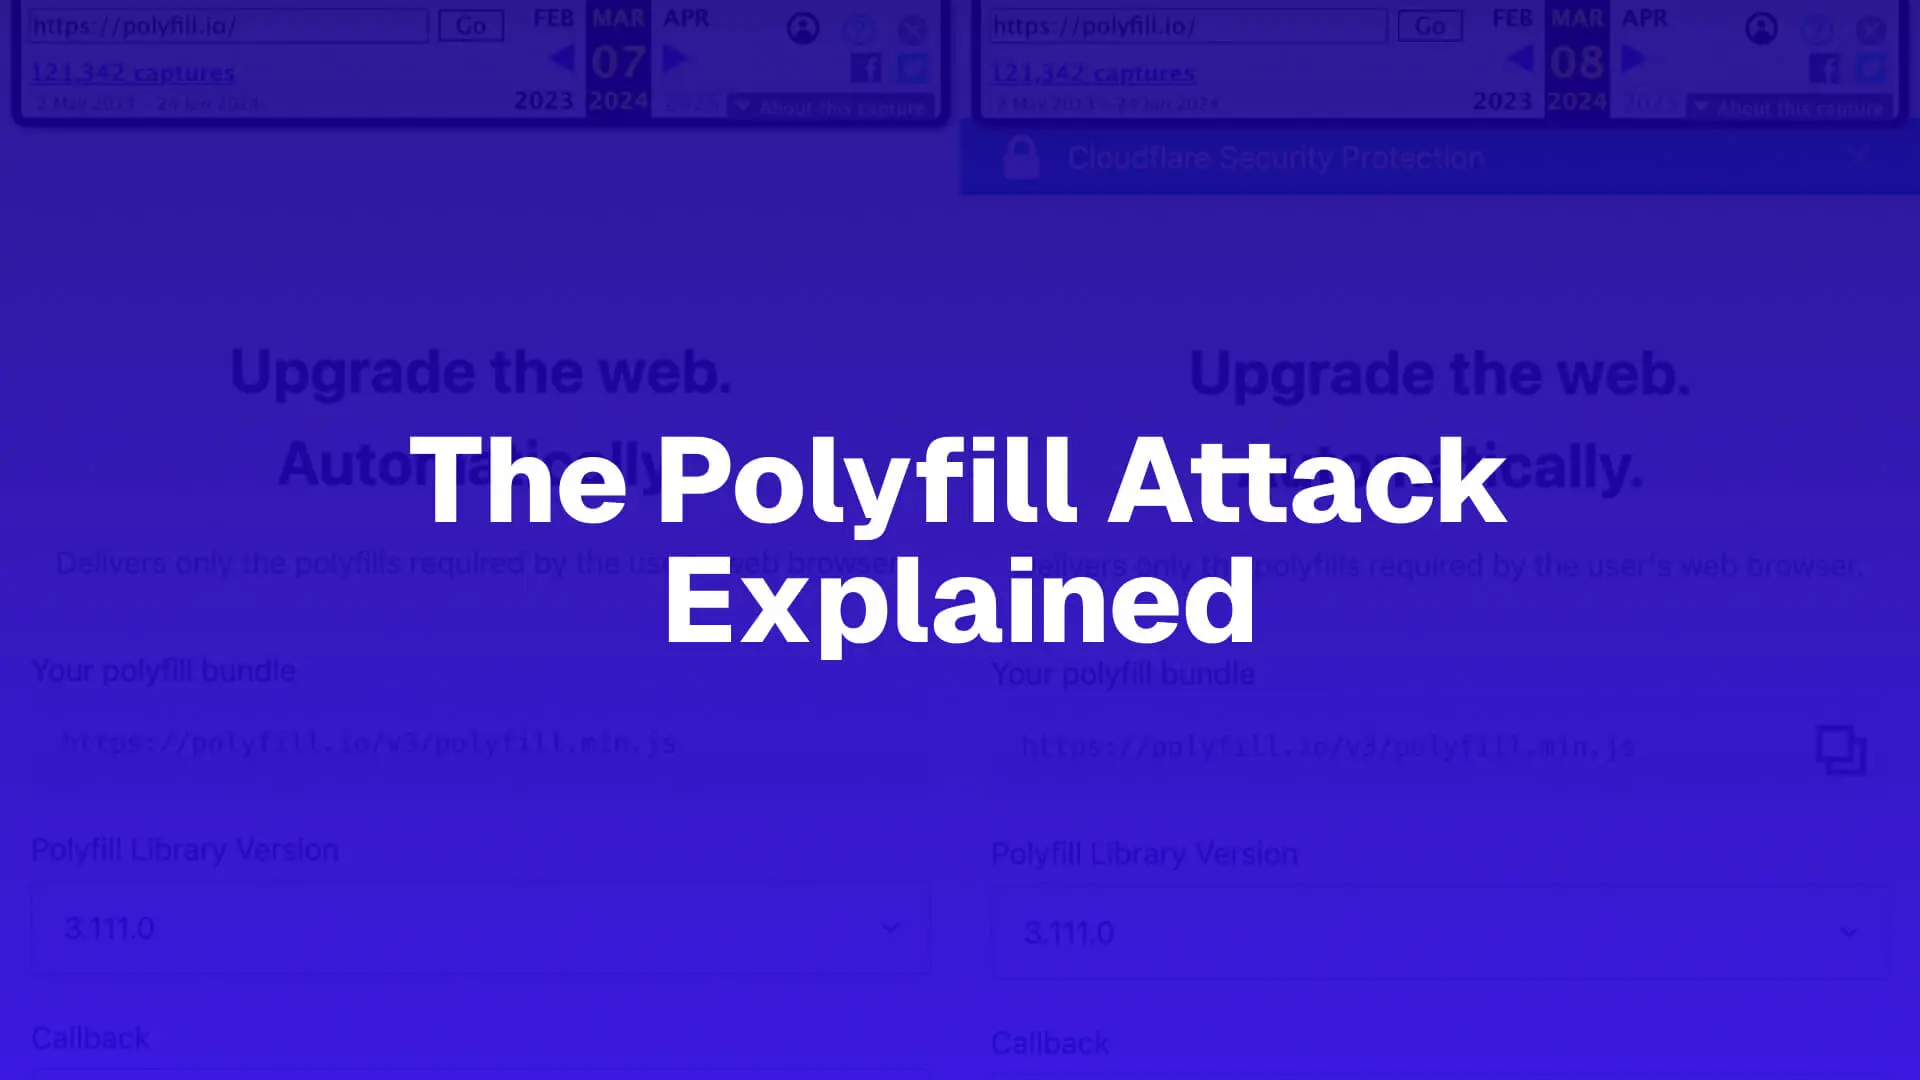 The title of the article on a blue background with a screenshot of the old Polyfill site coming through